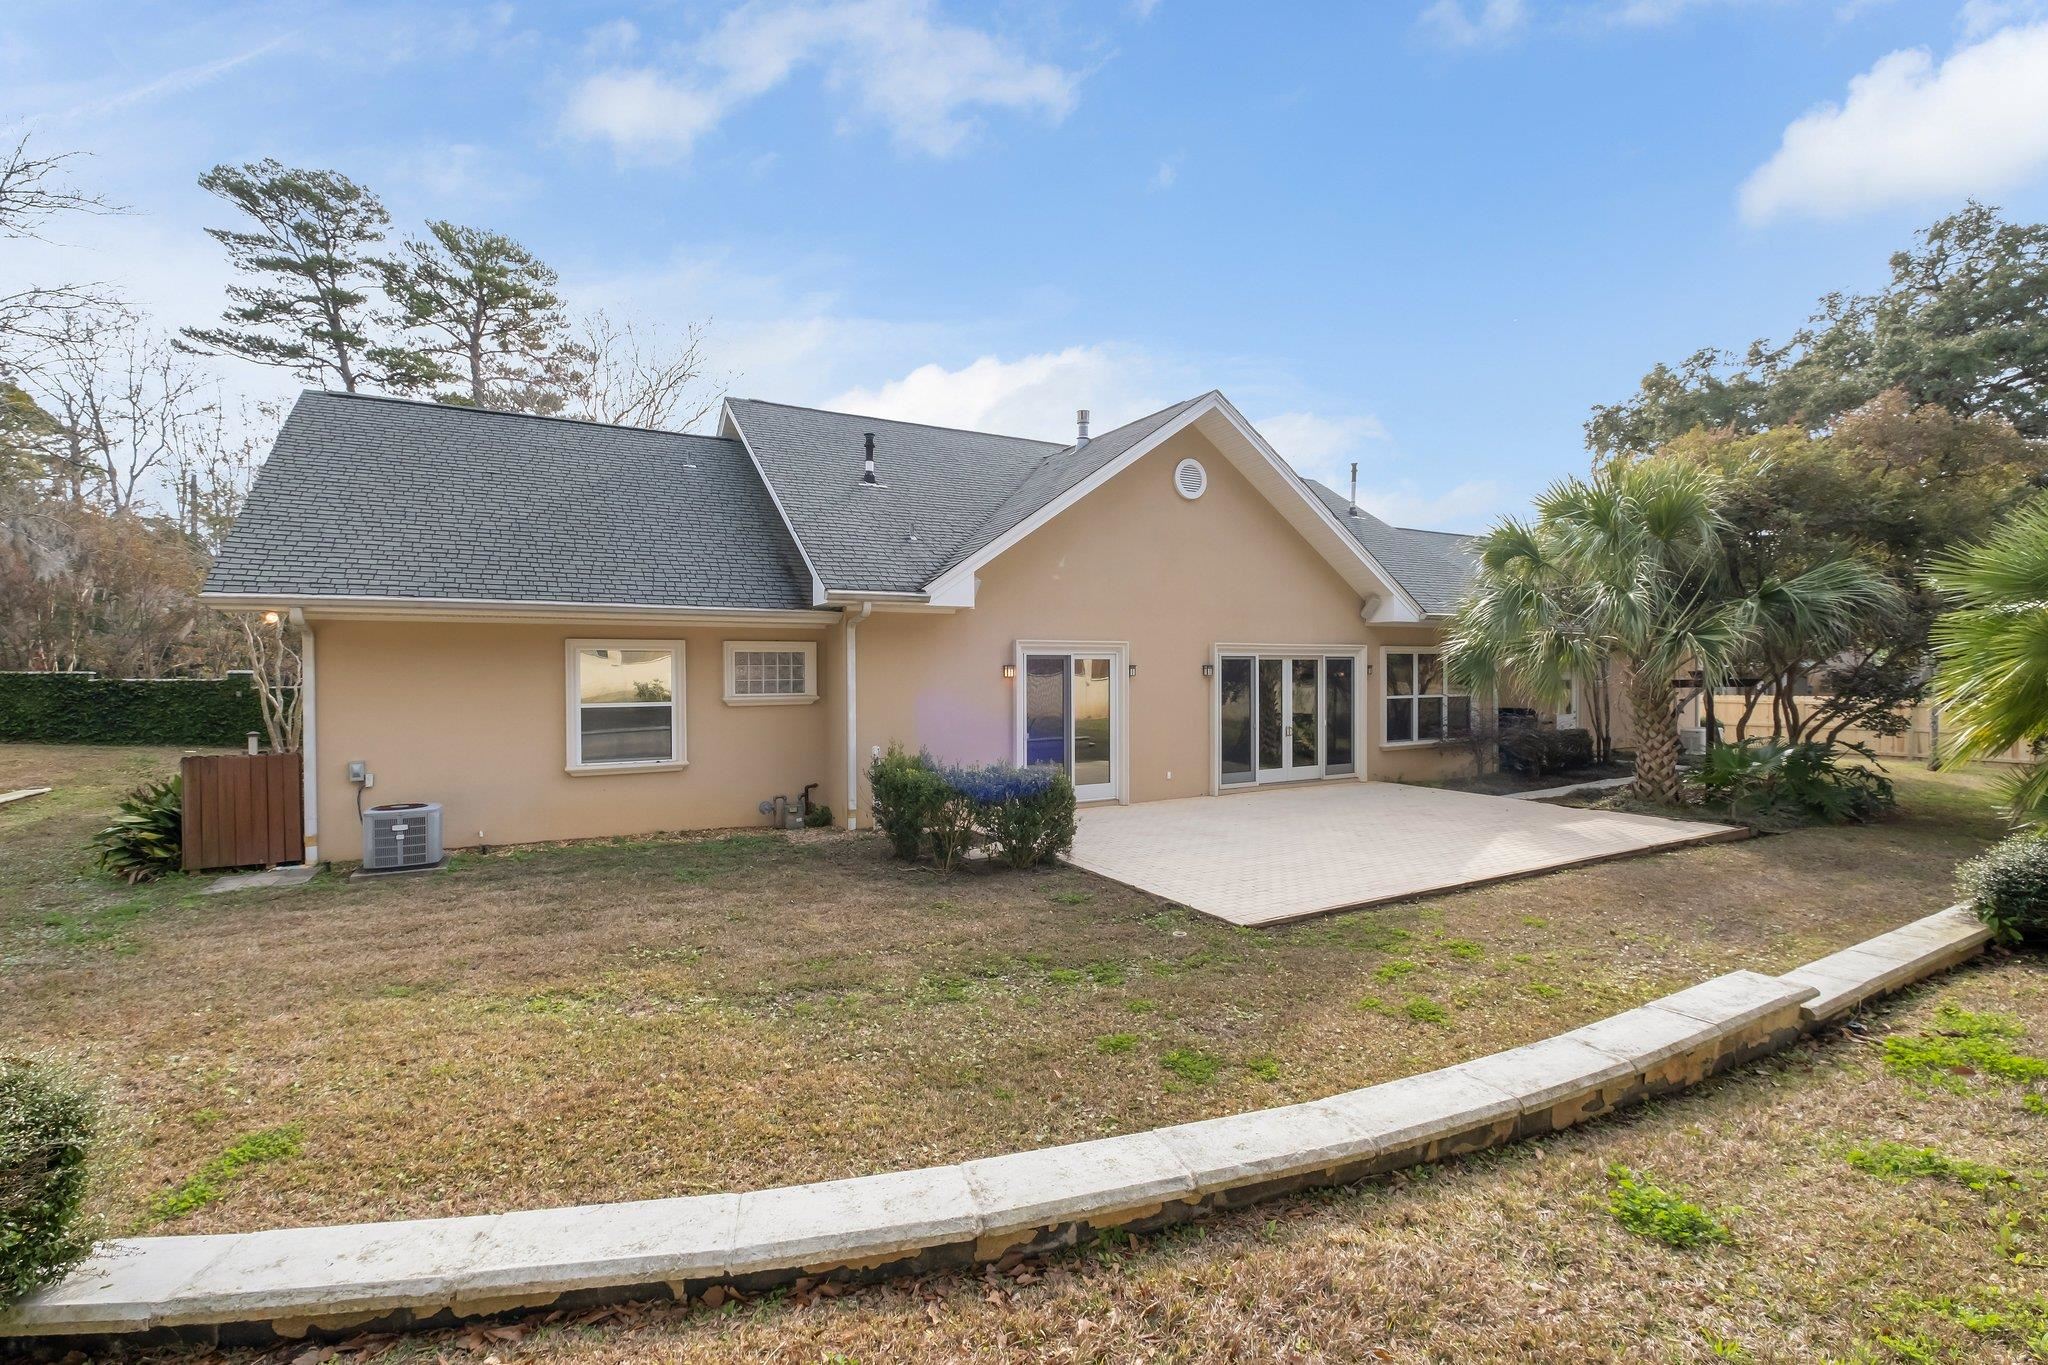 1504 China Grove Trail,TALLAHASSEE,Florida 32301,2 Bedrooms Bedrooms,2 BathroomsBathrooms,Detached single family,1504 China Grove Trail,368485